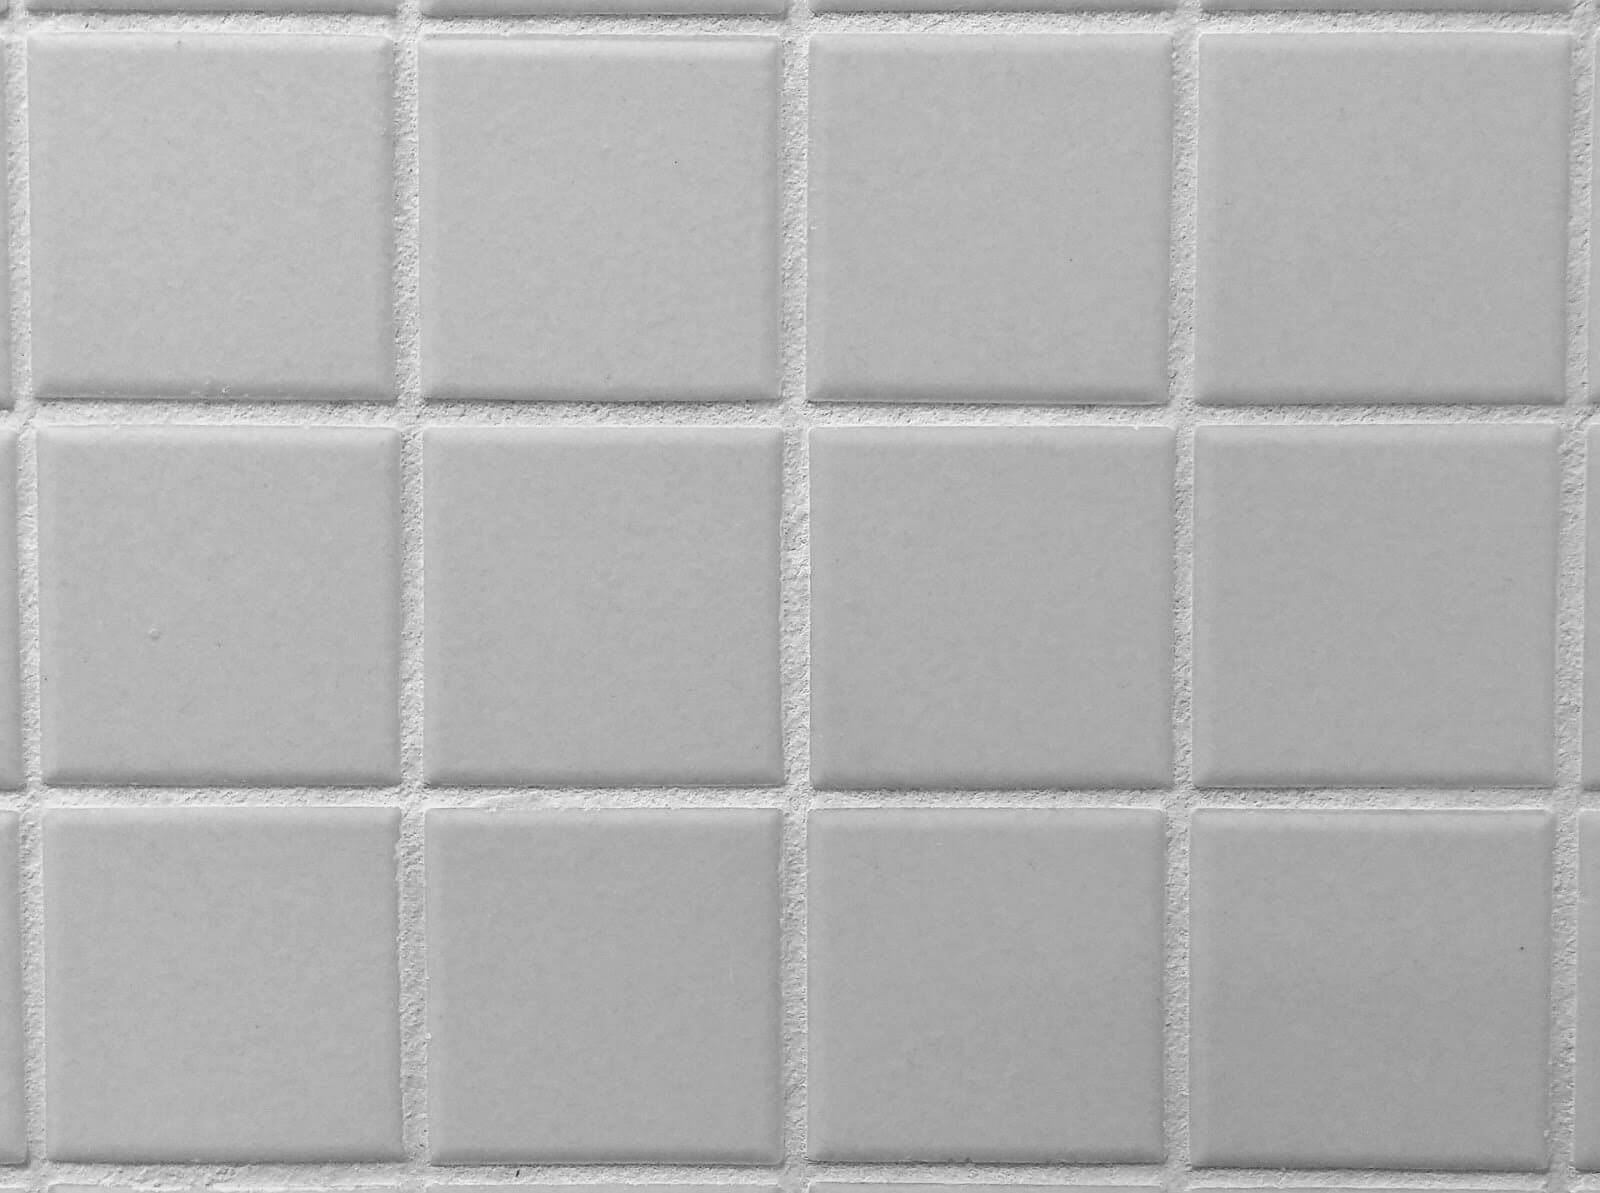 What You Need to Know About Tile Grout